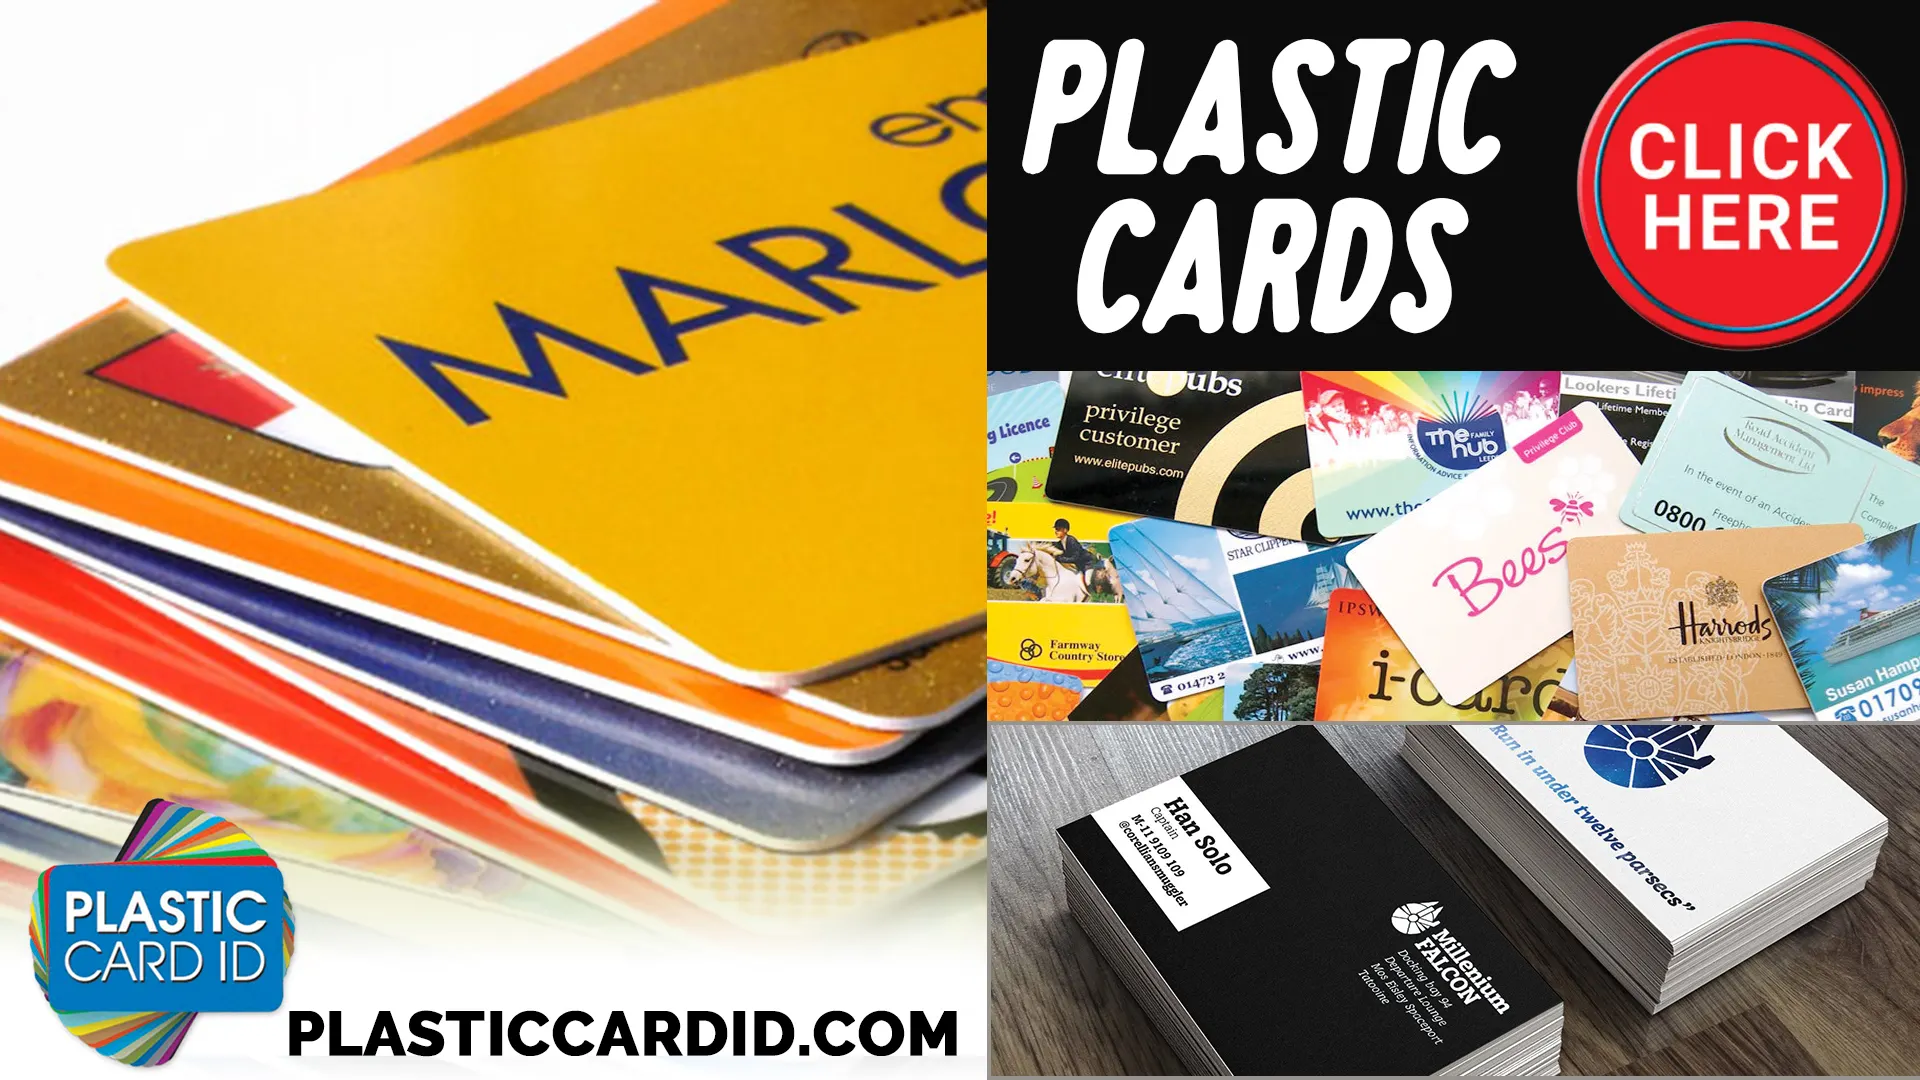 Redefining Accessibility with Every Plastic Card